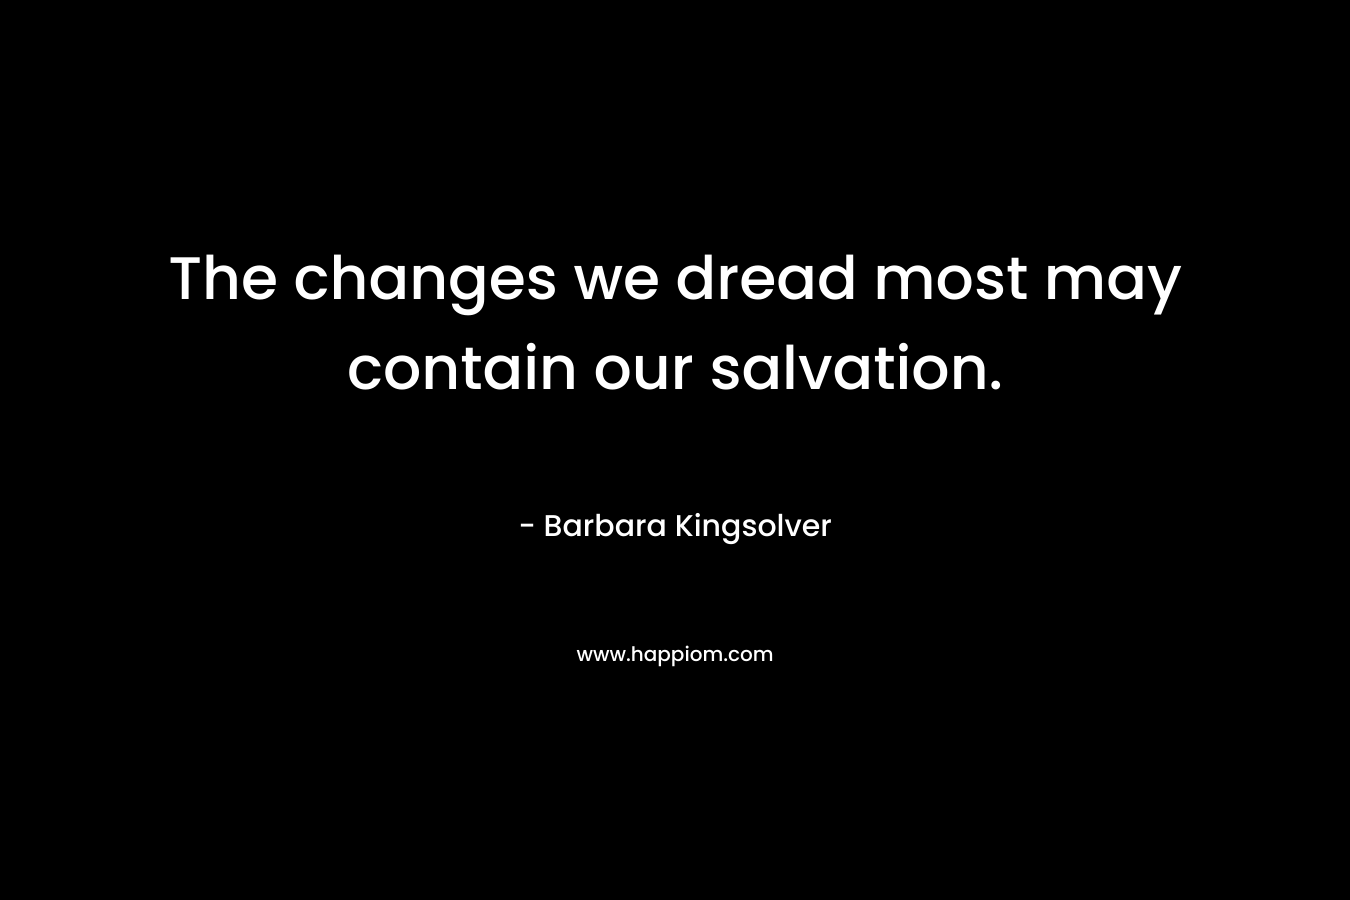 The changes we dread most may contain our salvation.